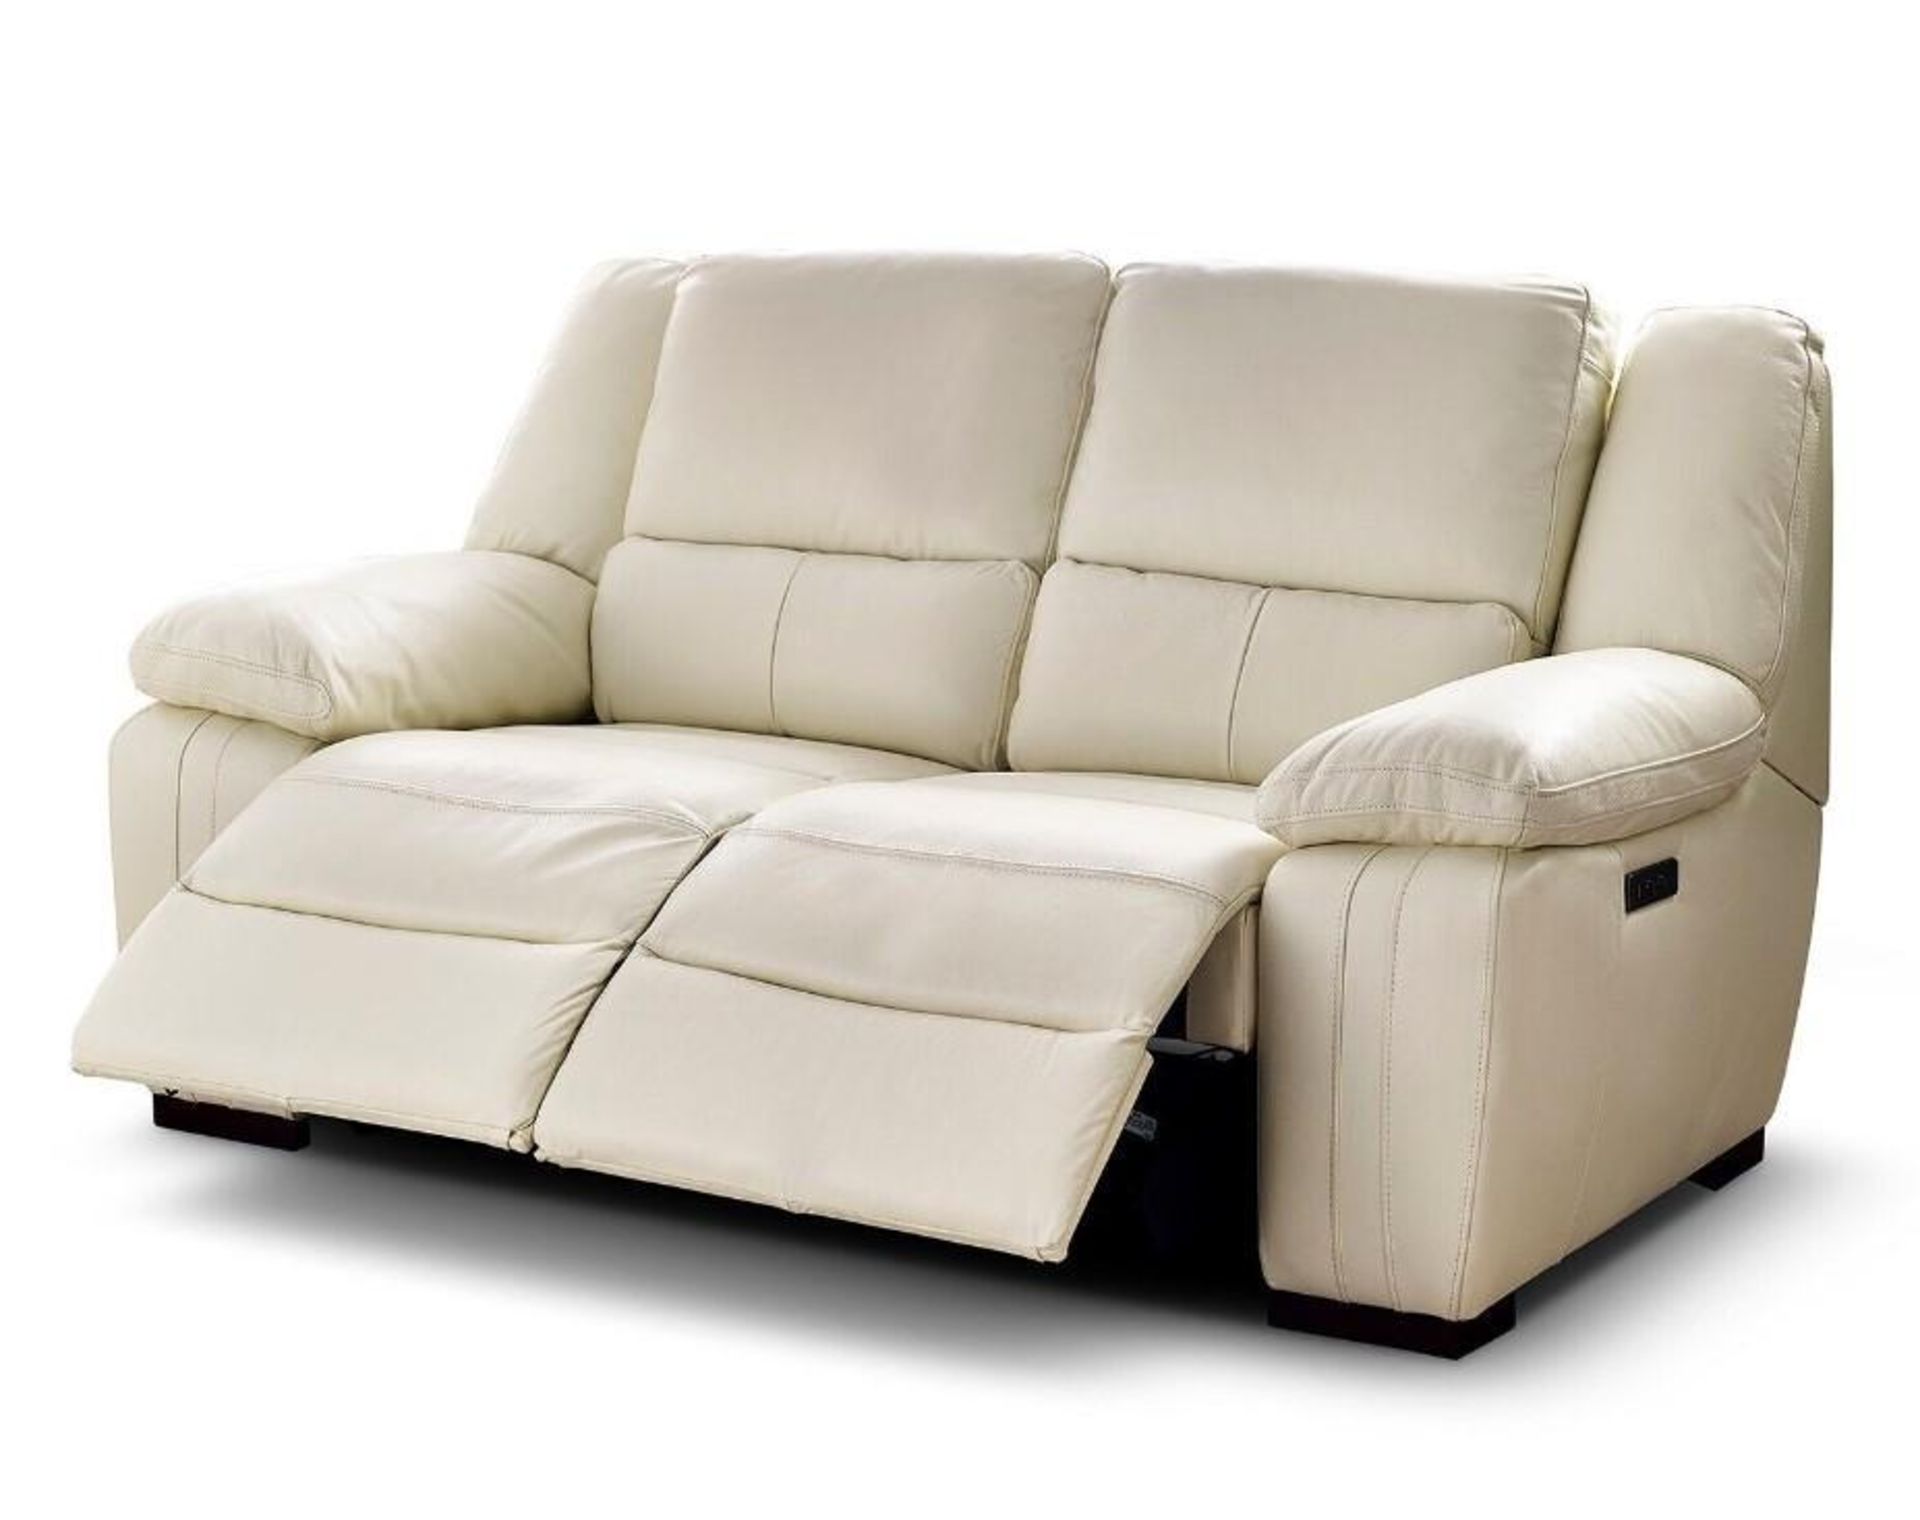 Brand new and boxed SCS Fallon 3 + 2 seater electric reclining sofa in Cream. - Image 3 of 7